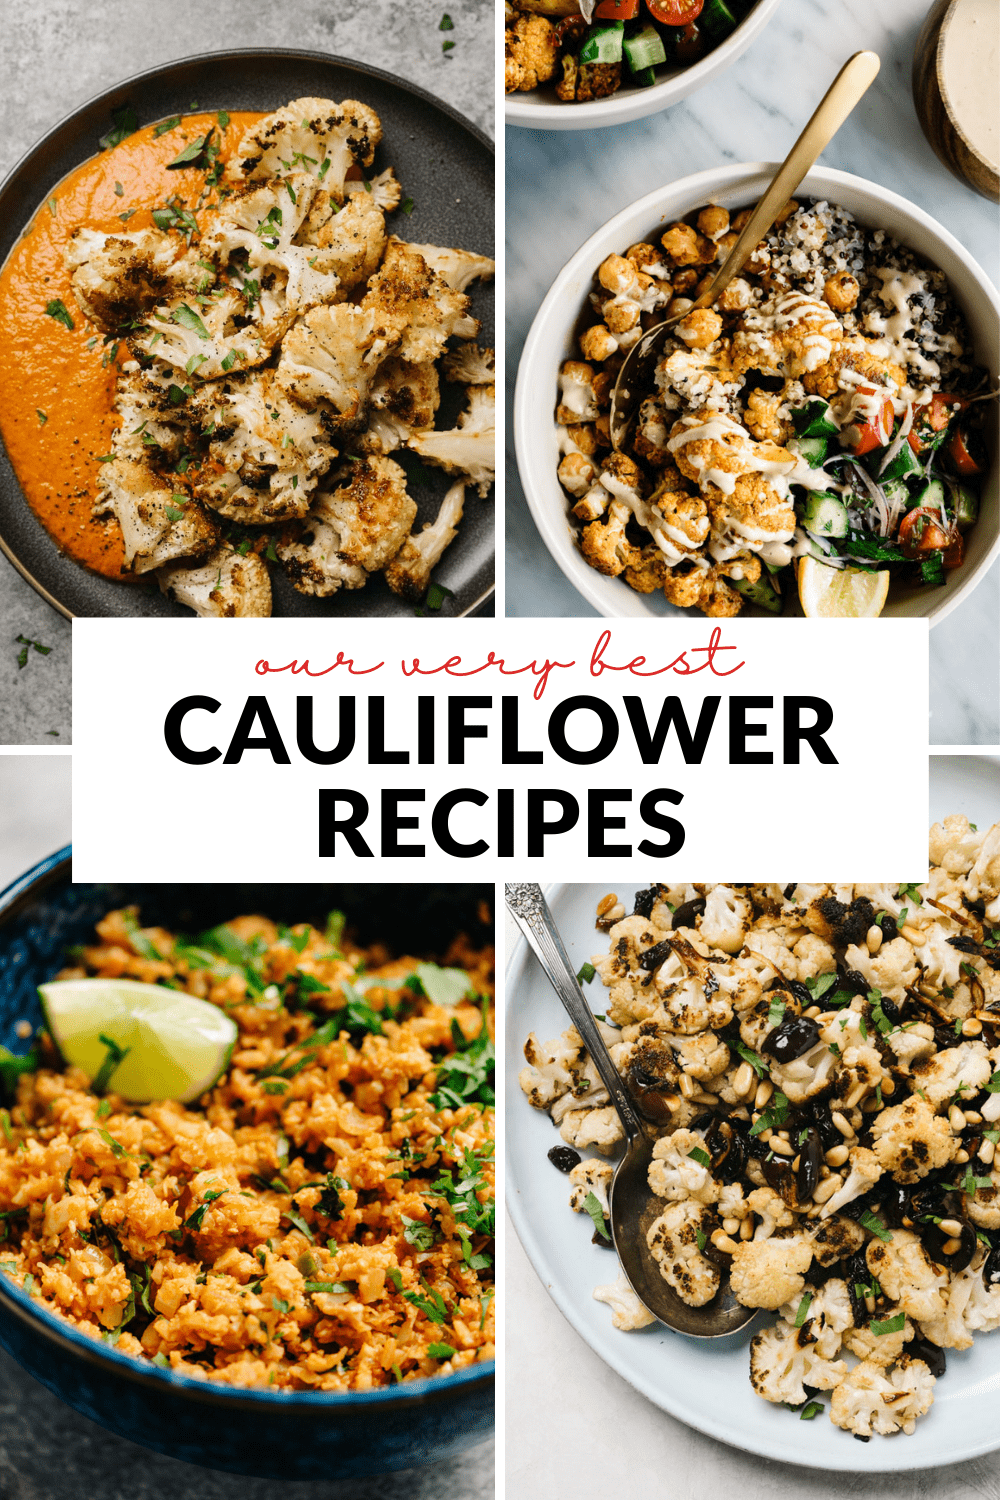 A collage of various cauliflower dishes with a title bar that reads "our very best cauliflower recipes".